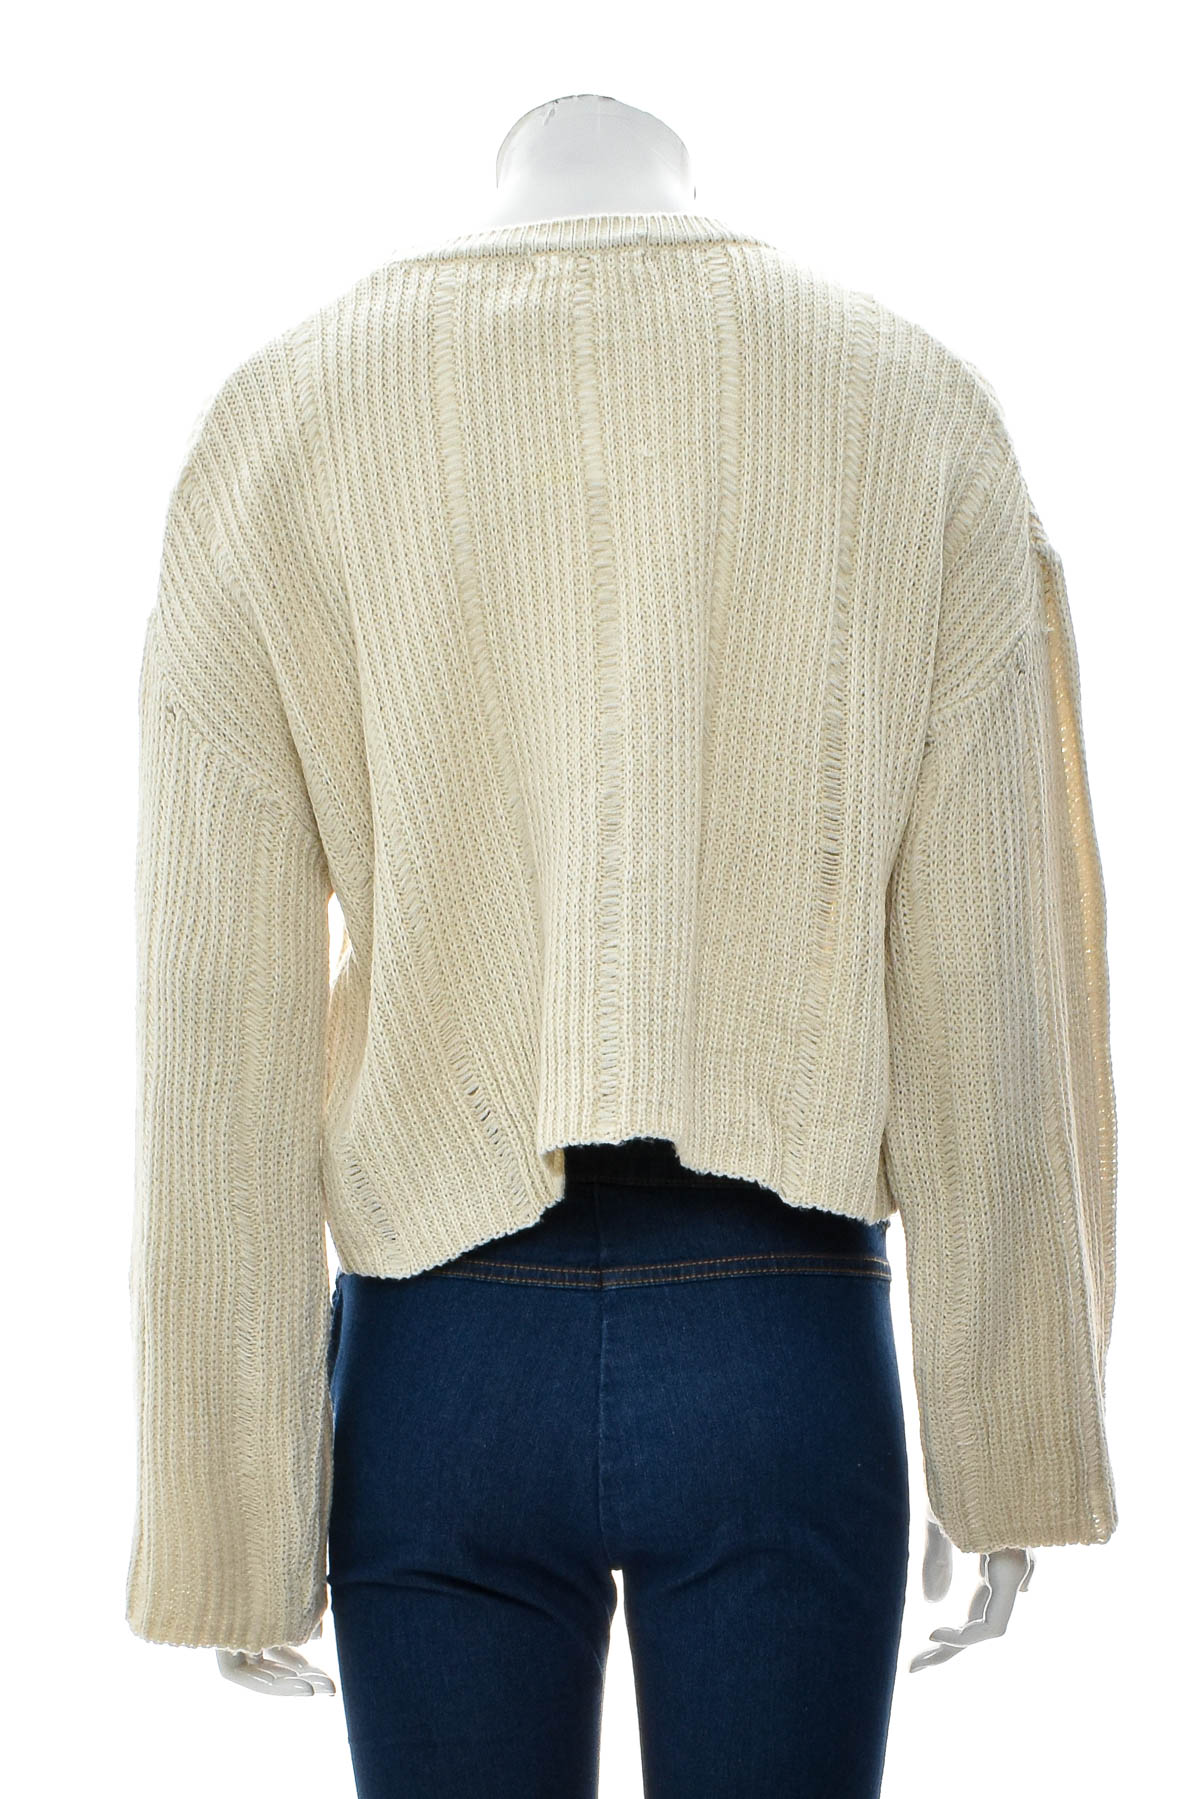 Women's sweater - Levely & Thisway - 1